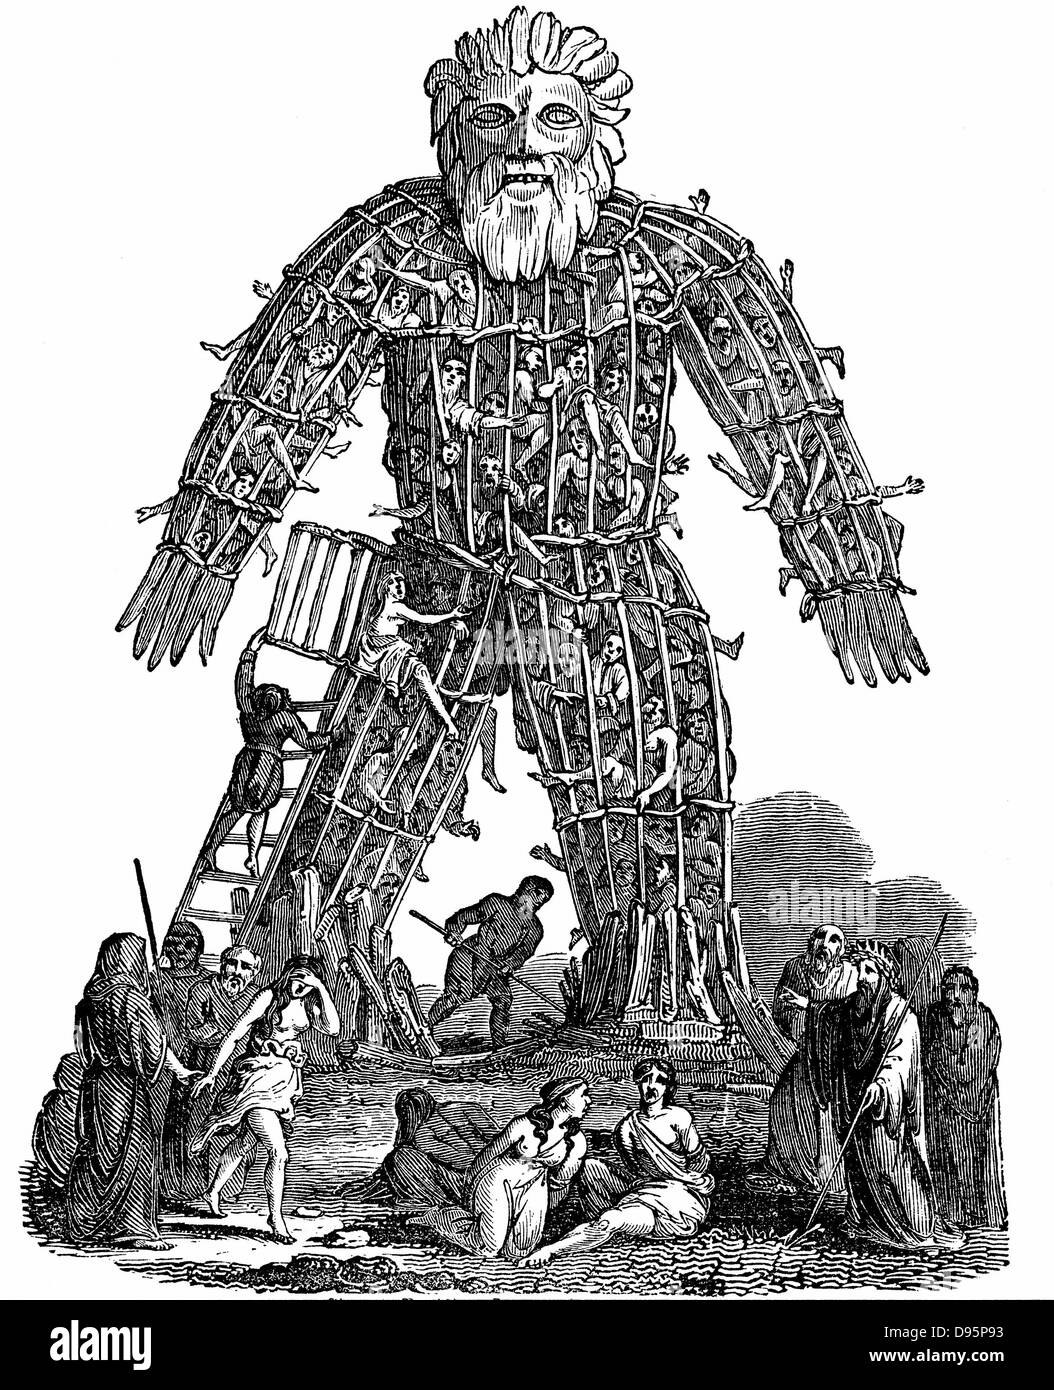 Druids making human sacrifice to their gods, based on report by Julius Caesar. Druids, the priests, teachers and judges of Celts suppressed by Romans c50 AD. Woodcut 1832. Wicker Man. Stock Photo